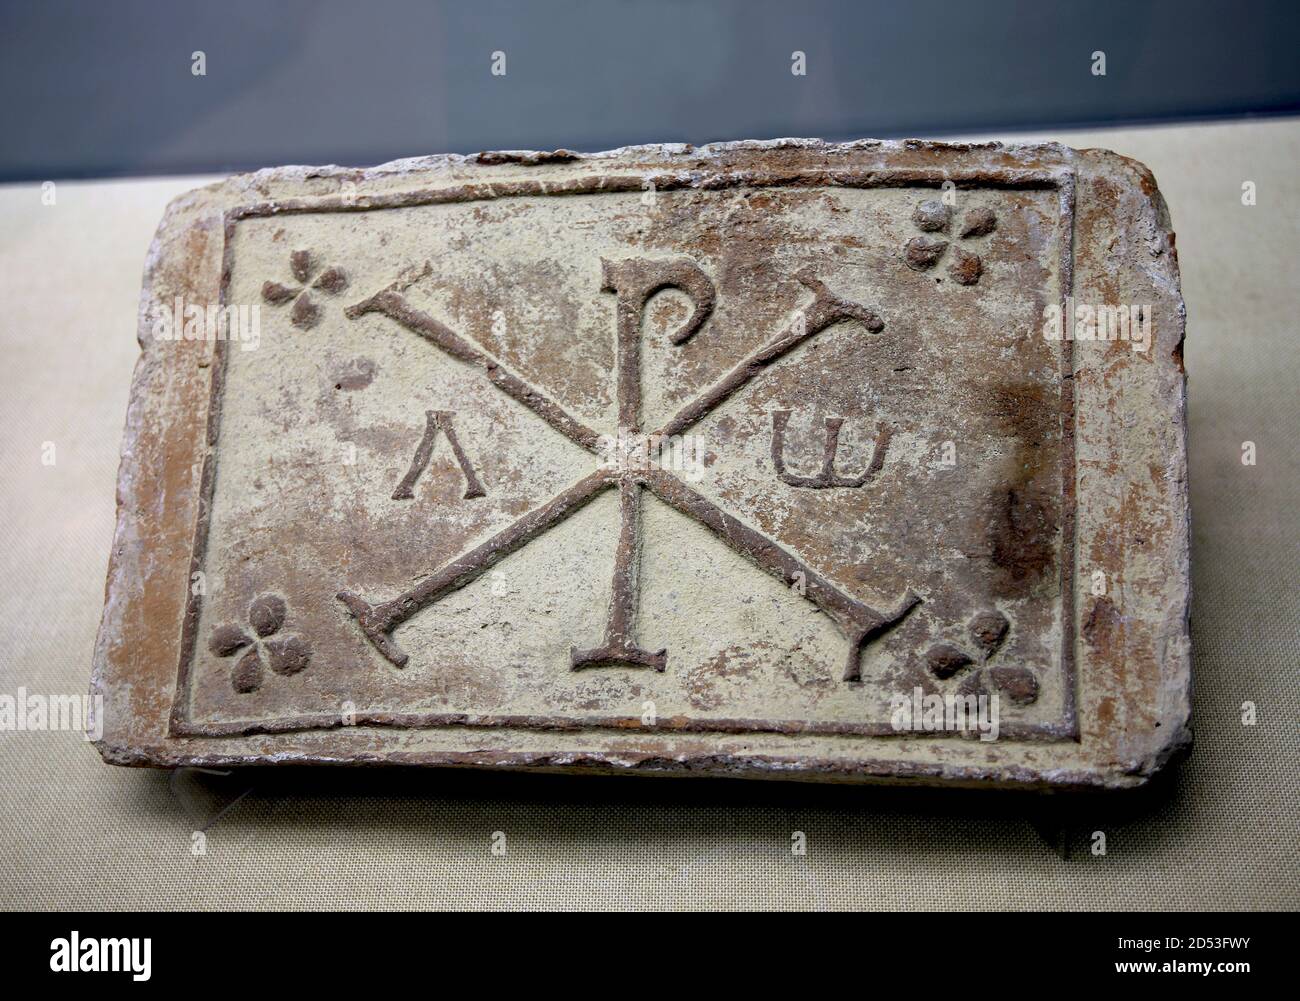 Ancient Roman brick. Stamp with the Chiro symbol and Alpha & Omega characters.  Terracotta. 4th-5th cent. AD. MAC, Barcelona, Spain Stock Photo